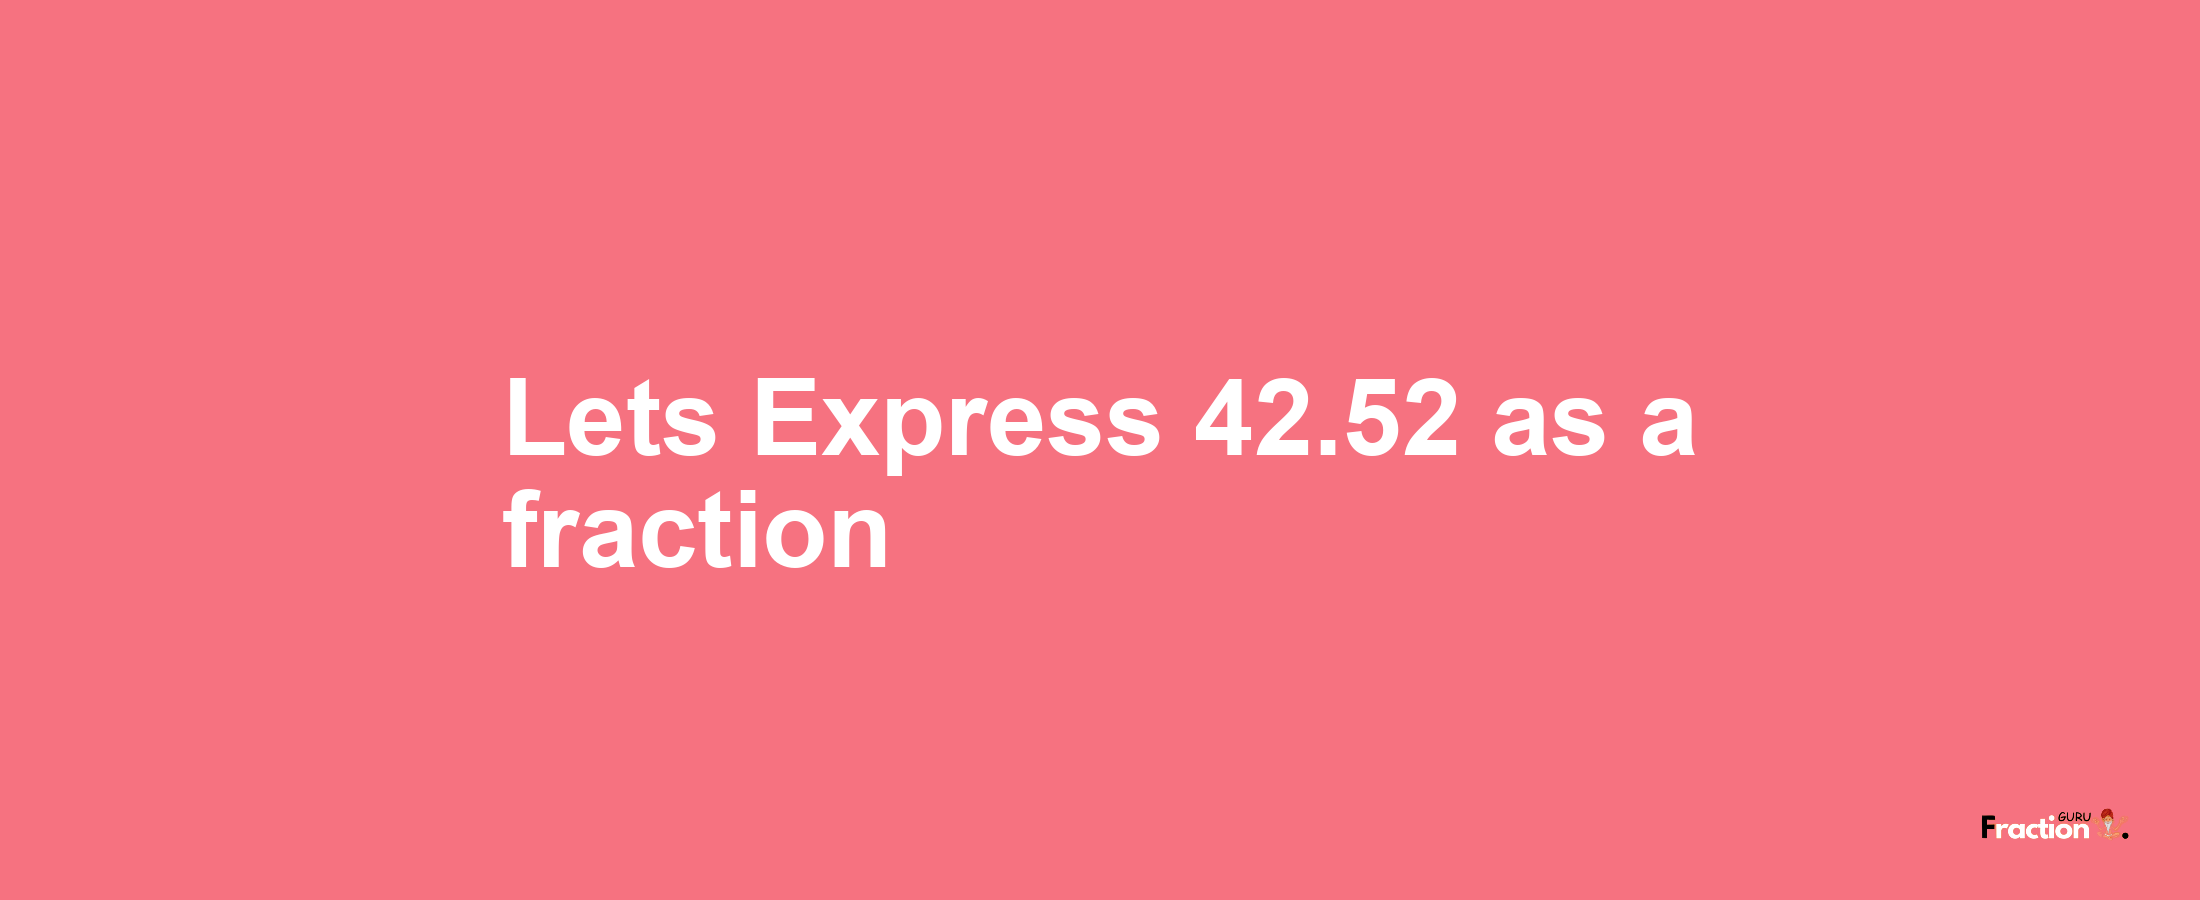 Lets Express 42.52 as afraction